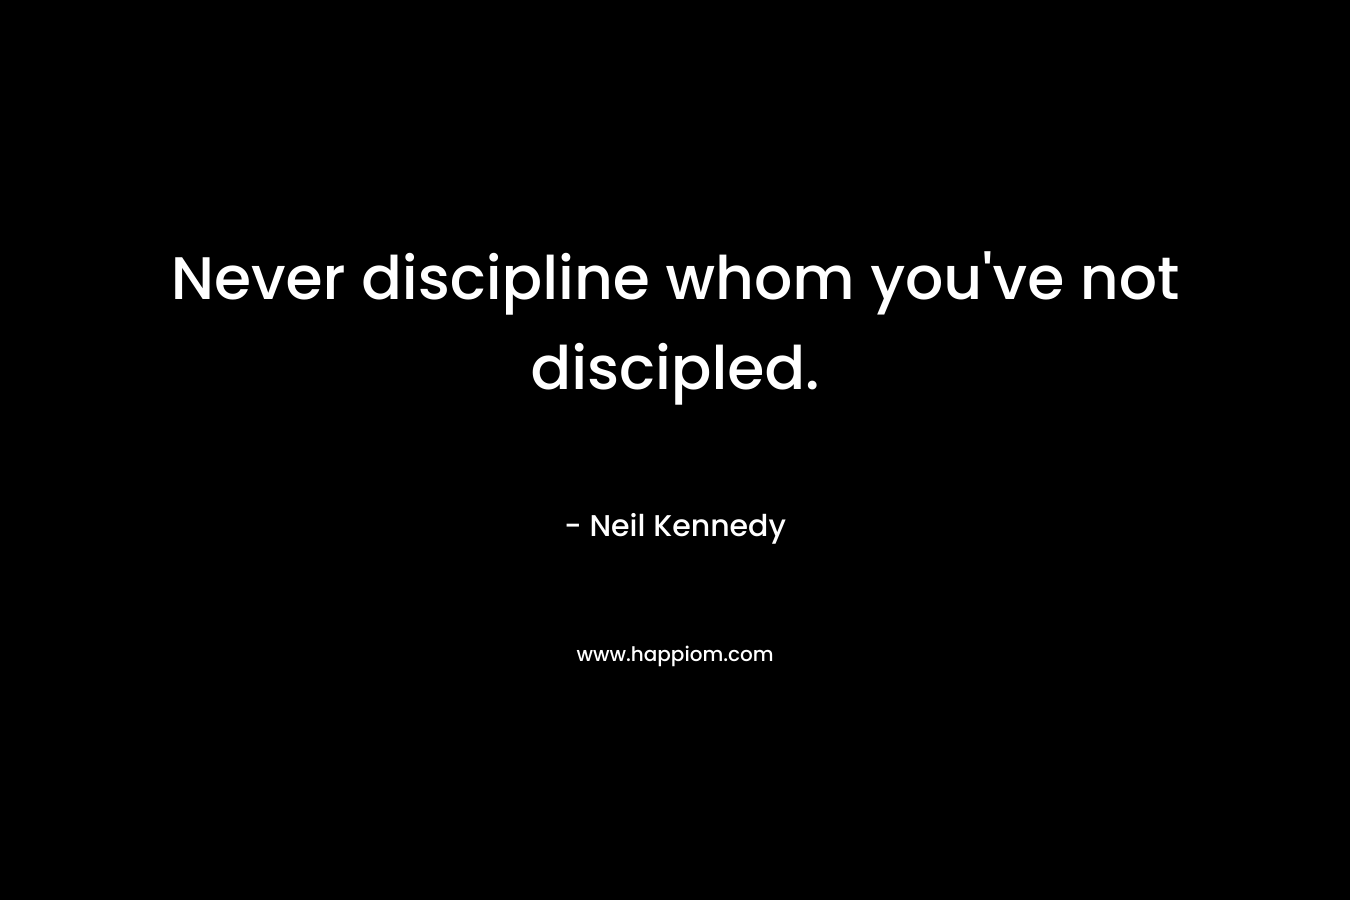 Never discipline whom you’ve not discipled. – Neil Kennedy